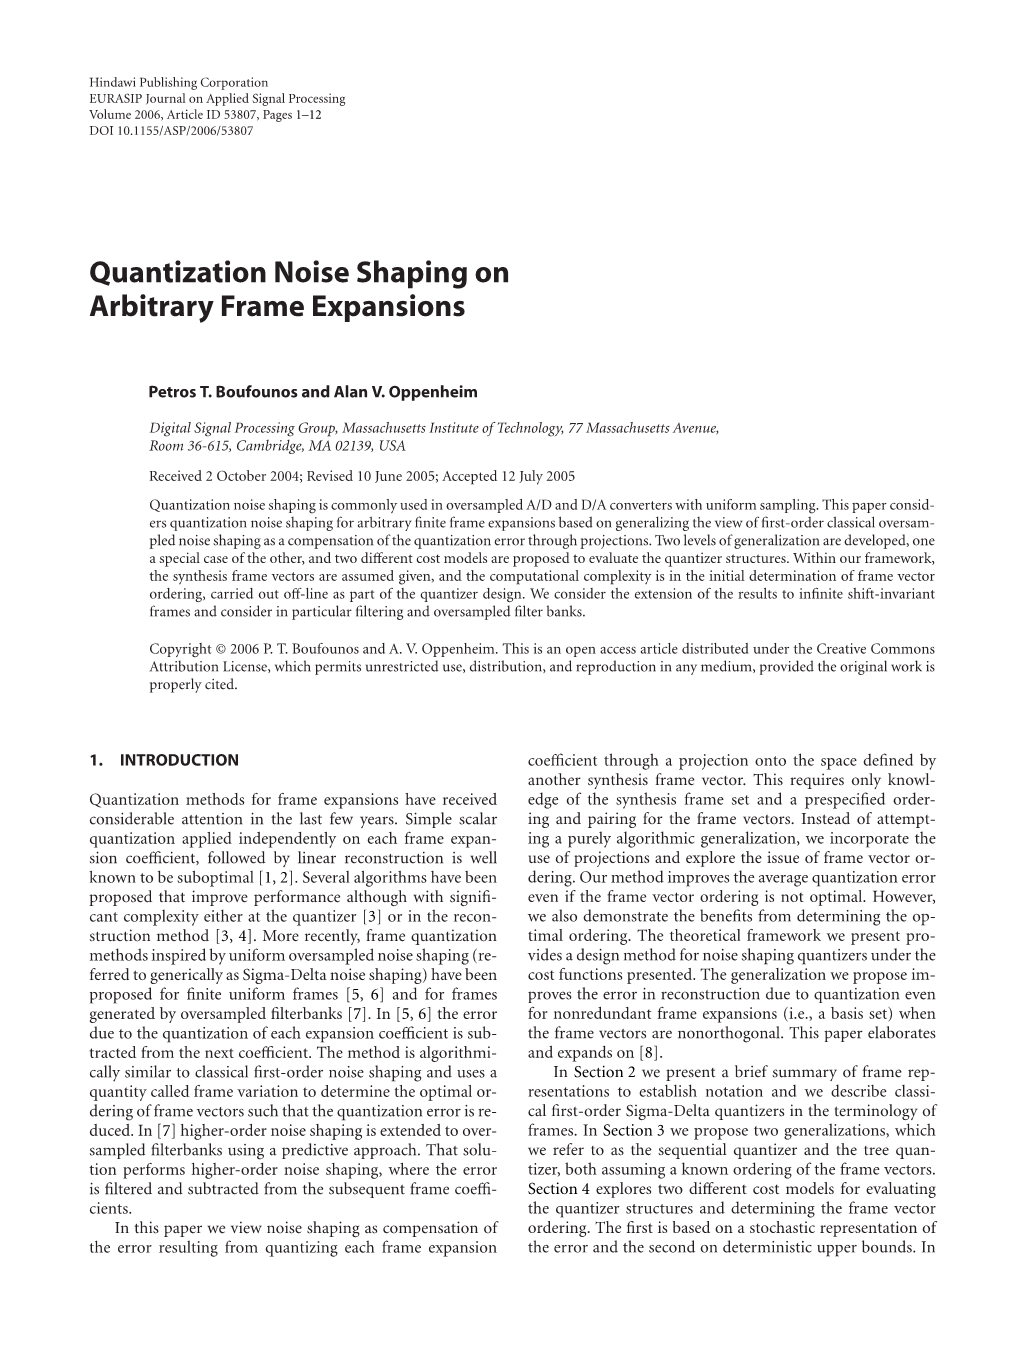 Quantization Noise Shaping on Arbitrary Frame Expansions